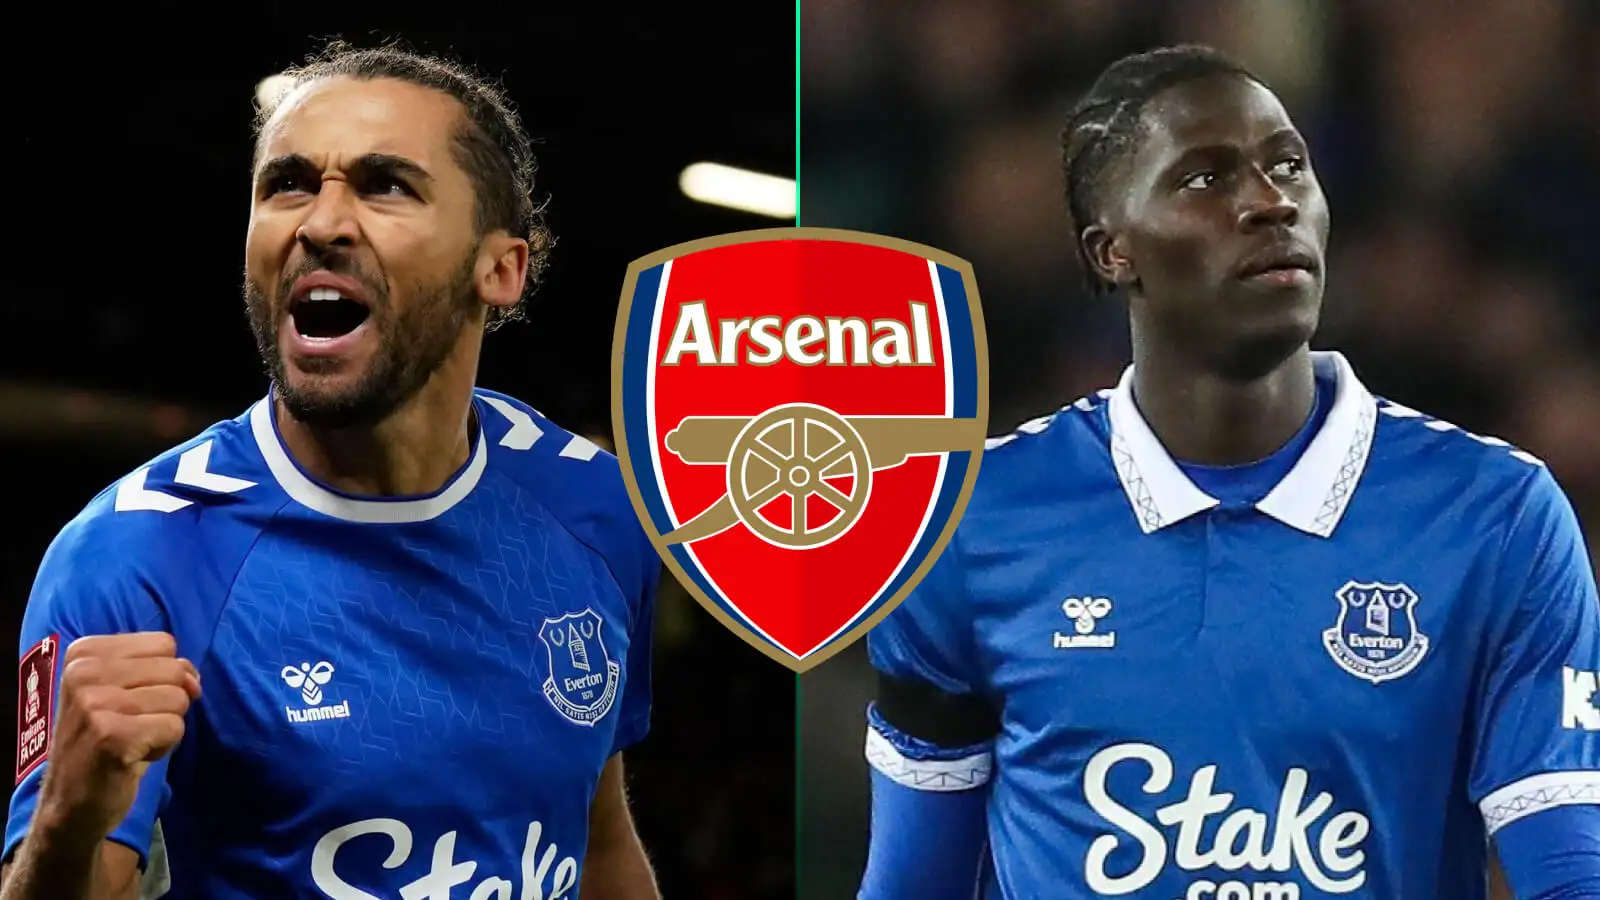 Everton duo Dominic Calvert-Lewin and Amadou Onana are both reportedly targets for Arsenal